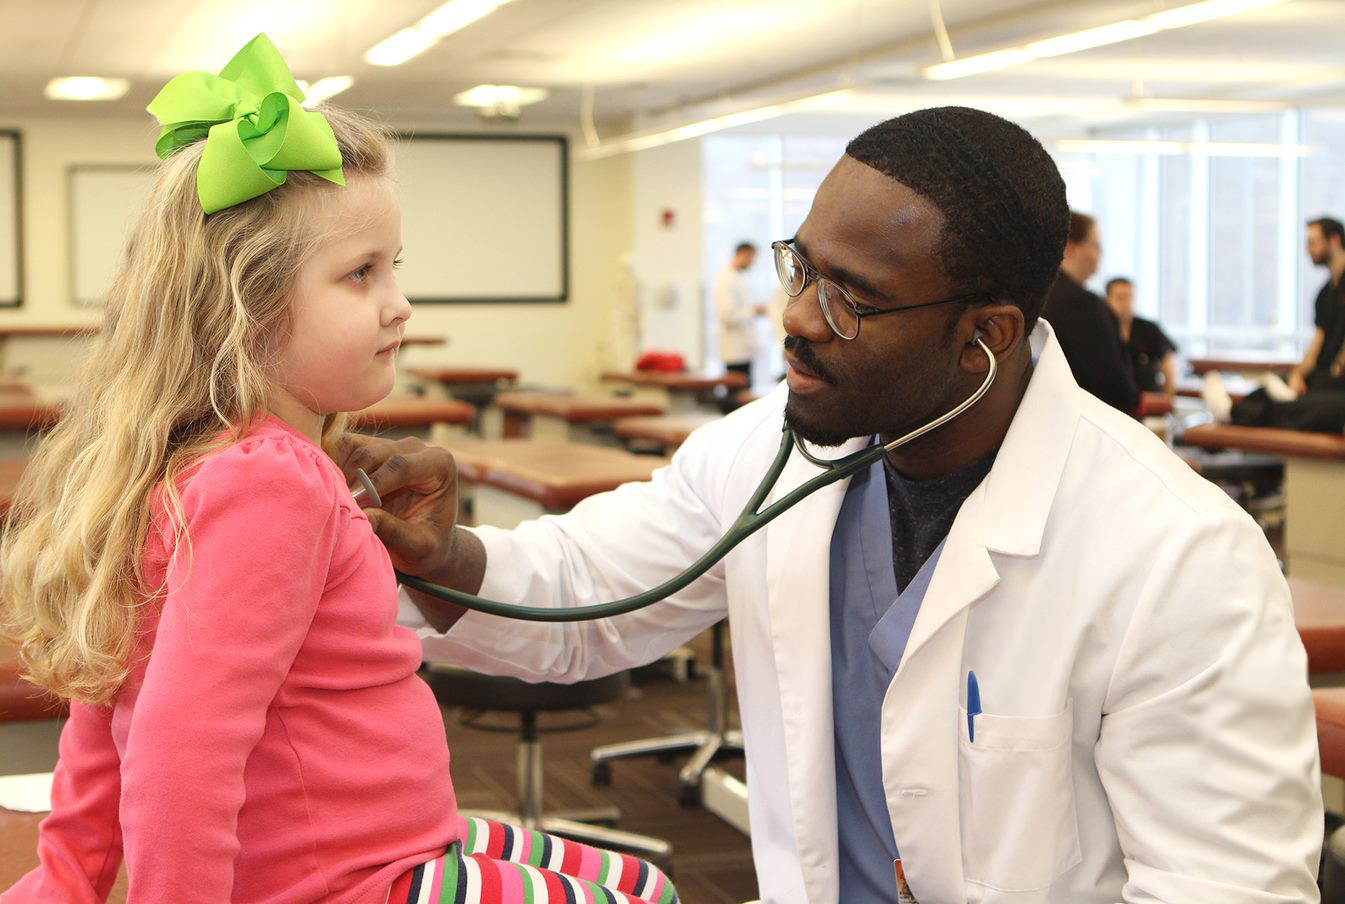 Med student uses stethoscope to listen to girl's heartbeat.